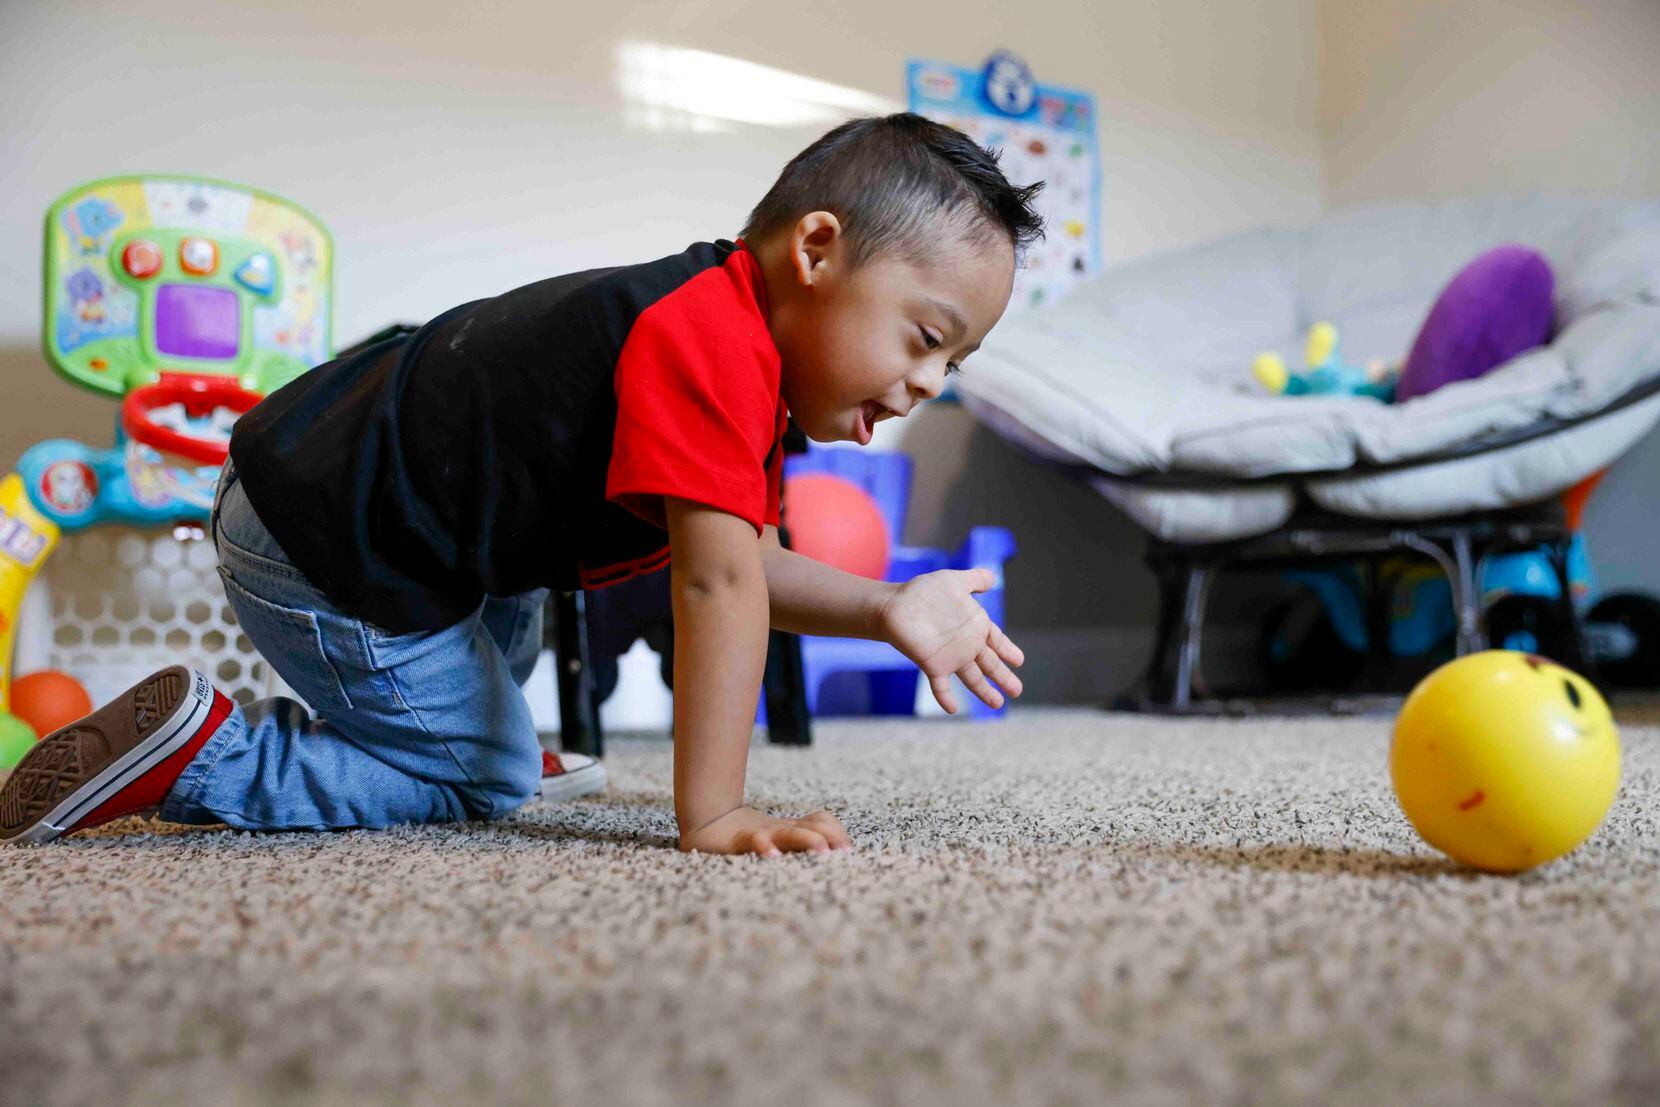 Pablo Chacón, 3, frolics in his playroom at his residence on Friday, Jan. 20, 2023 in...